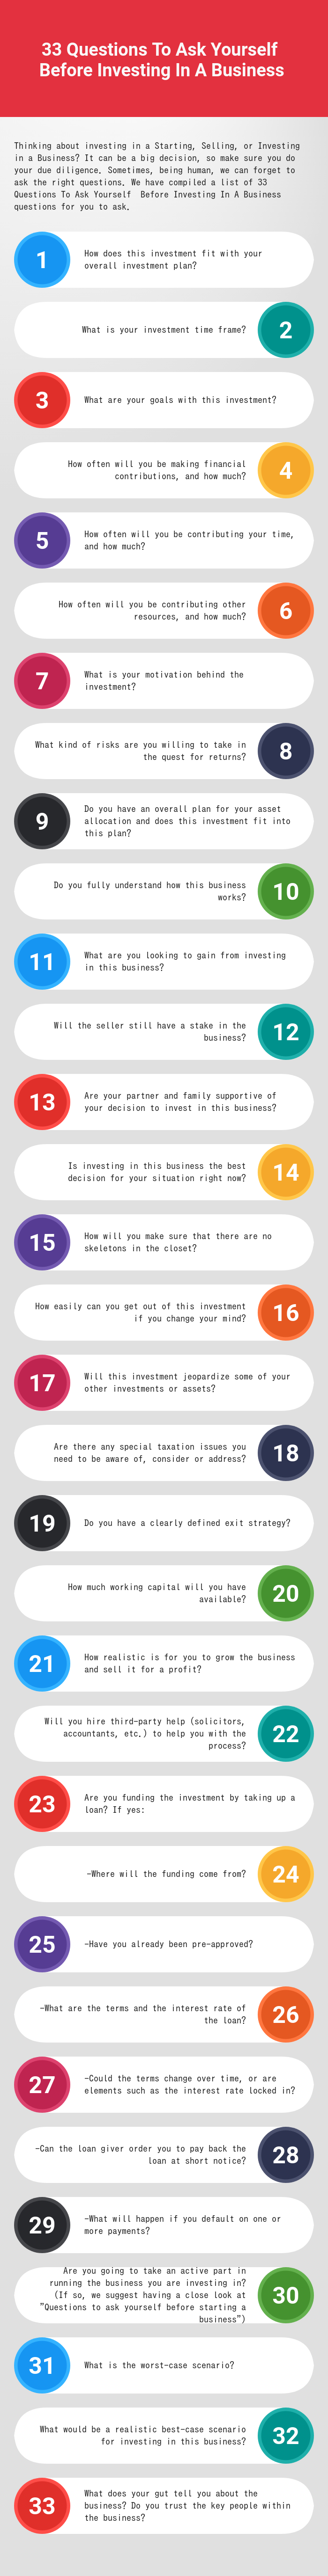 33 Questions To Ask Yourself  Before Investing In A Business